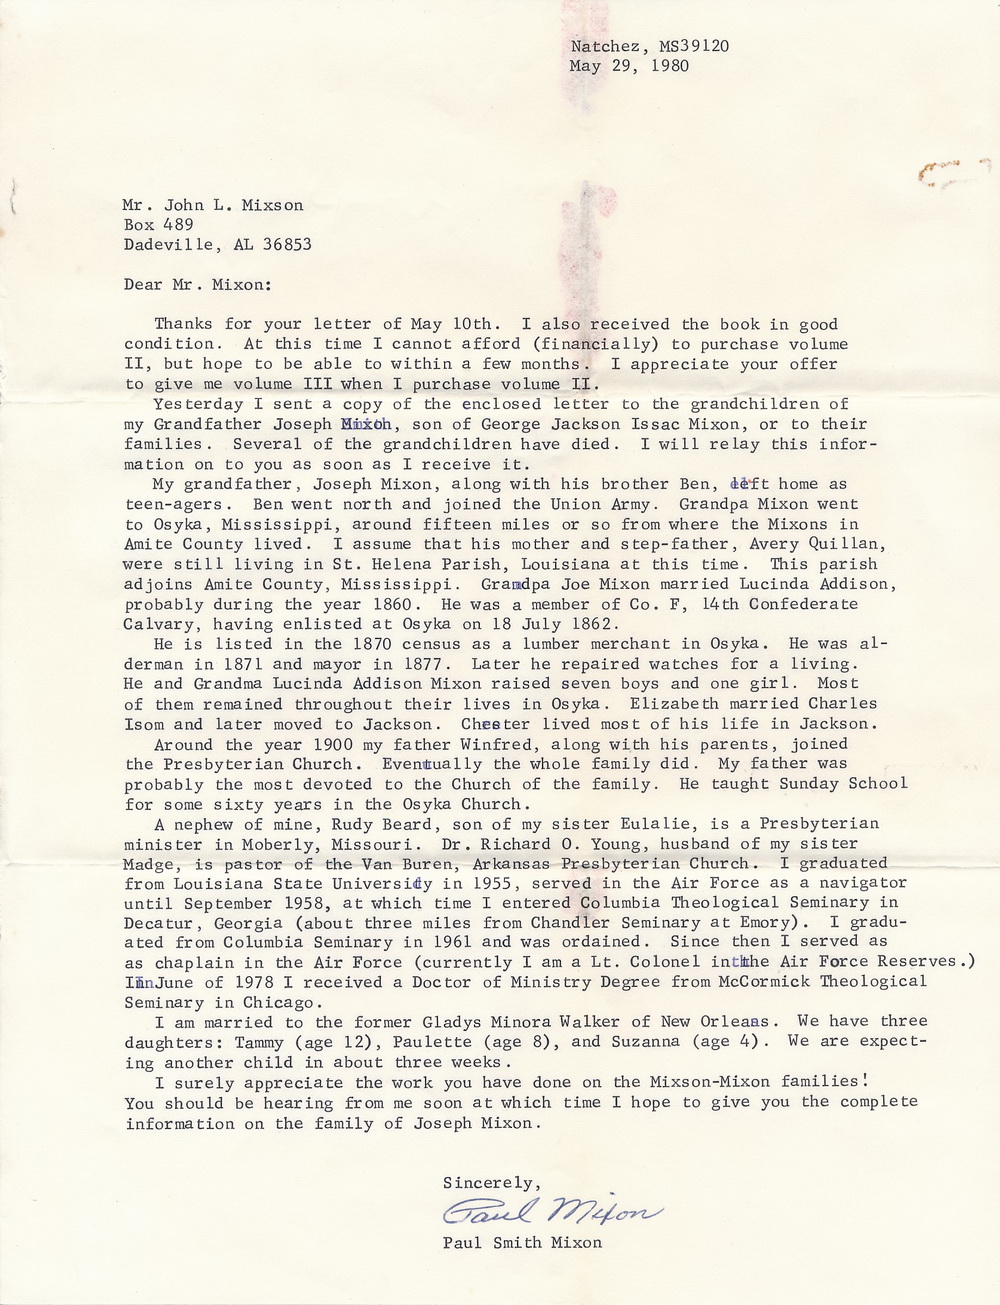 Letter from Paul Smith Mixon to John Leslie Mixson